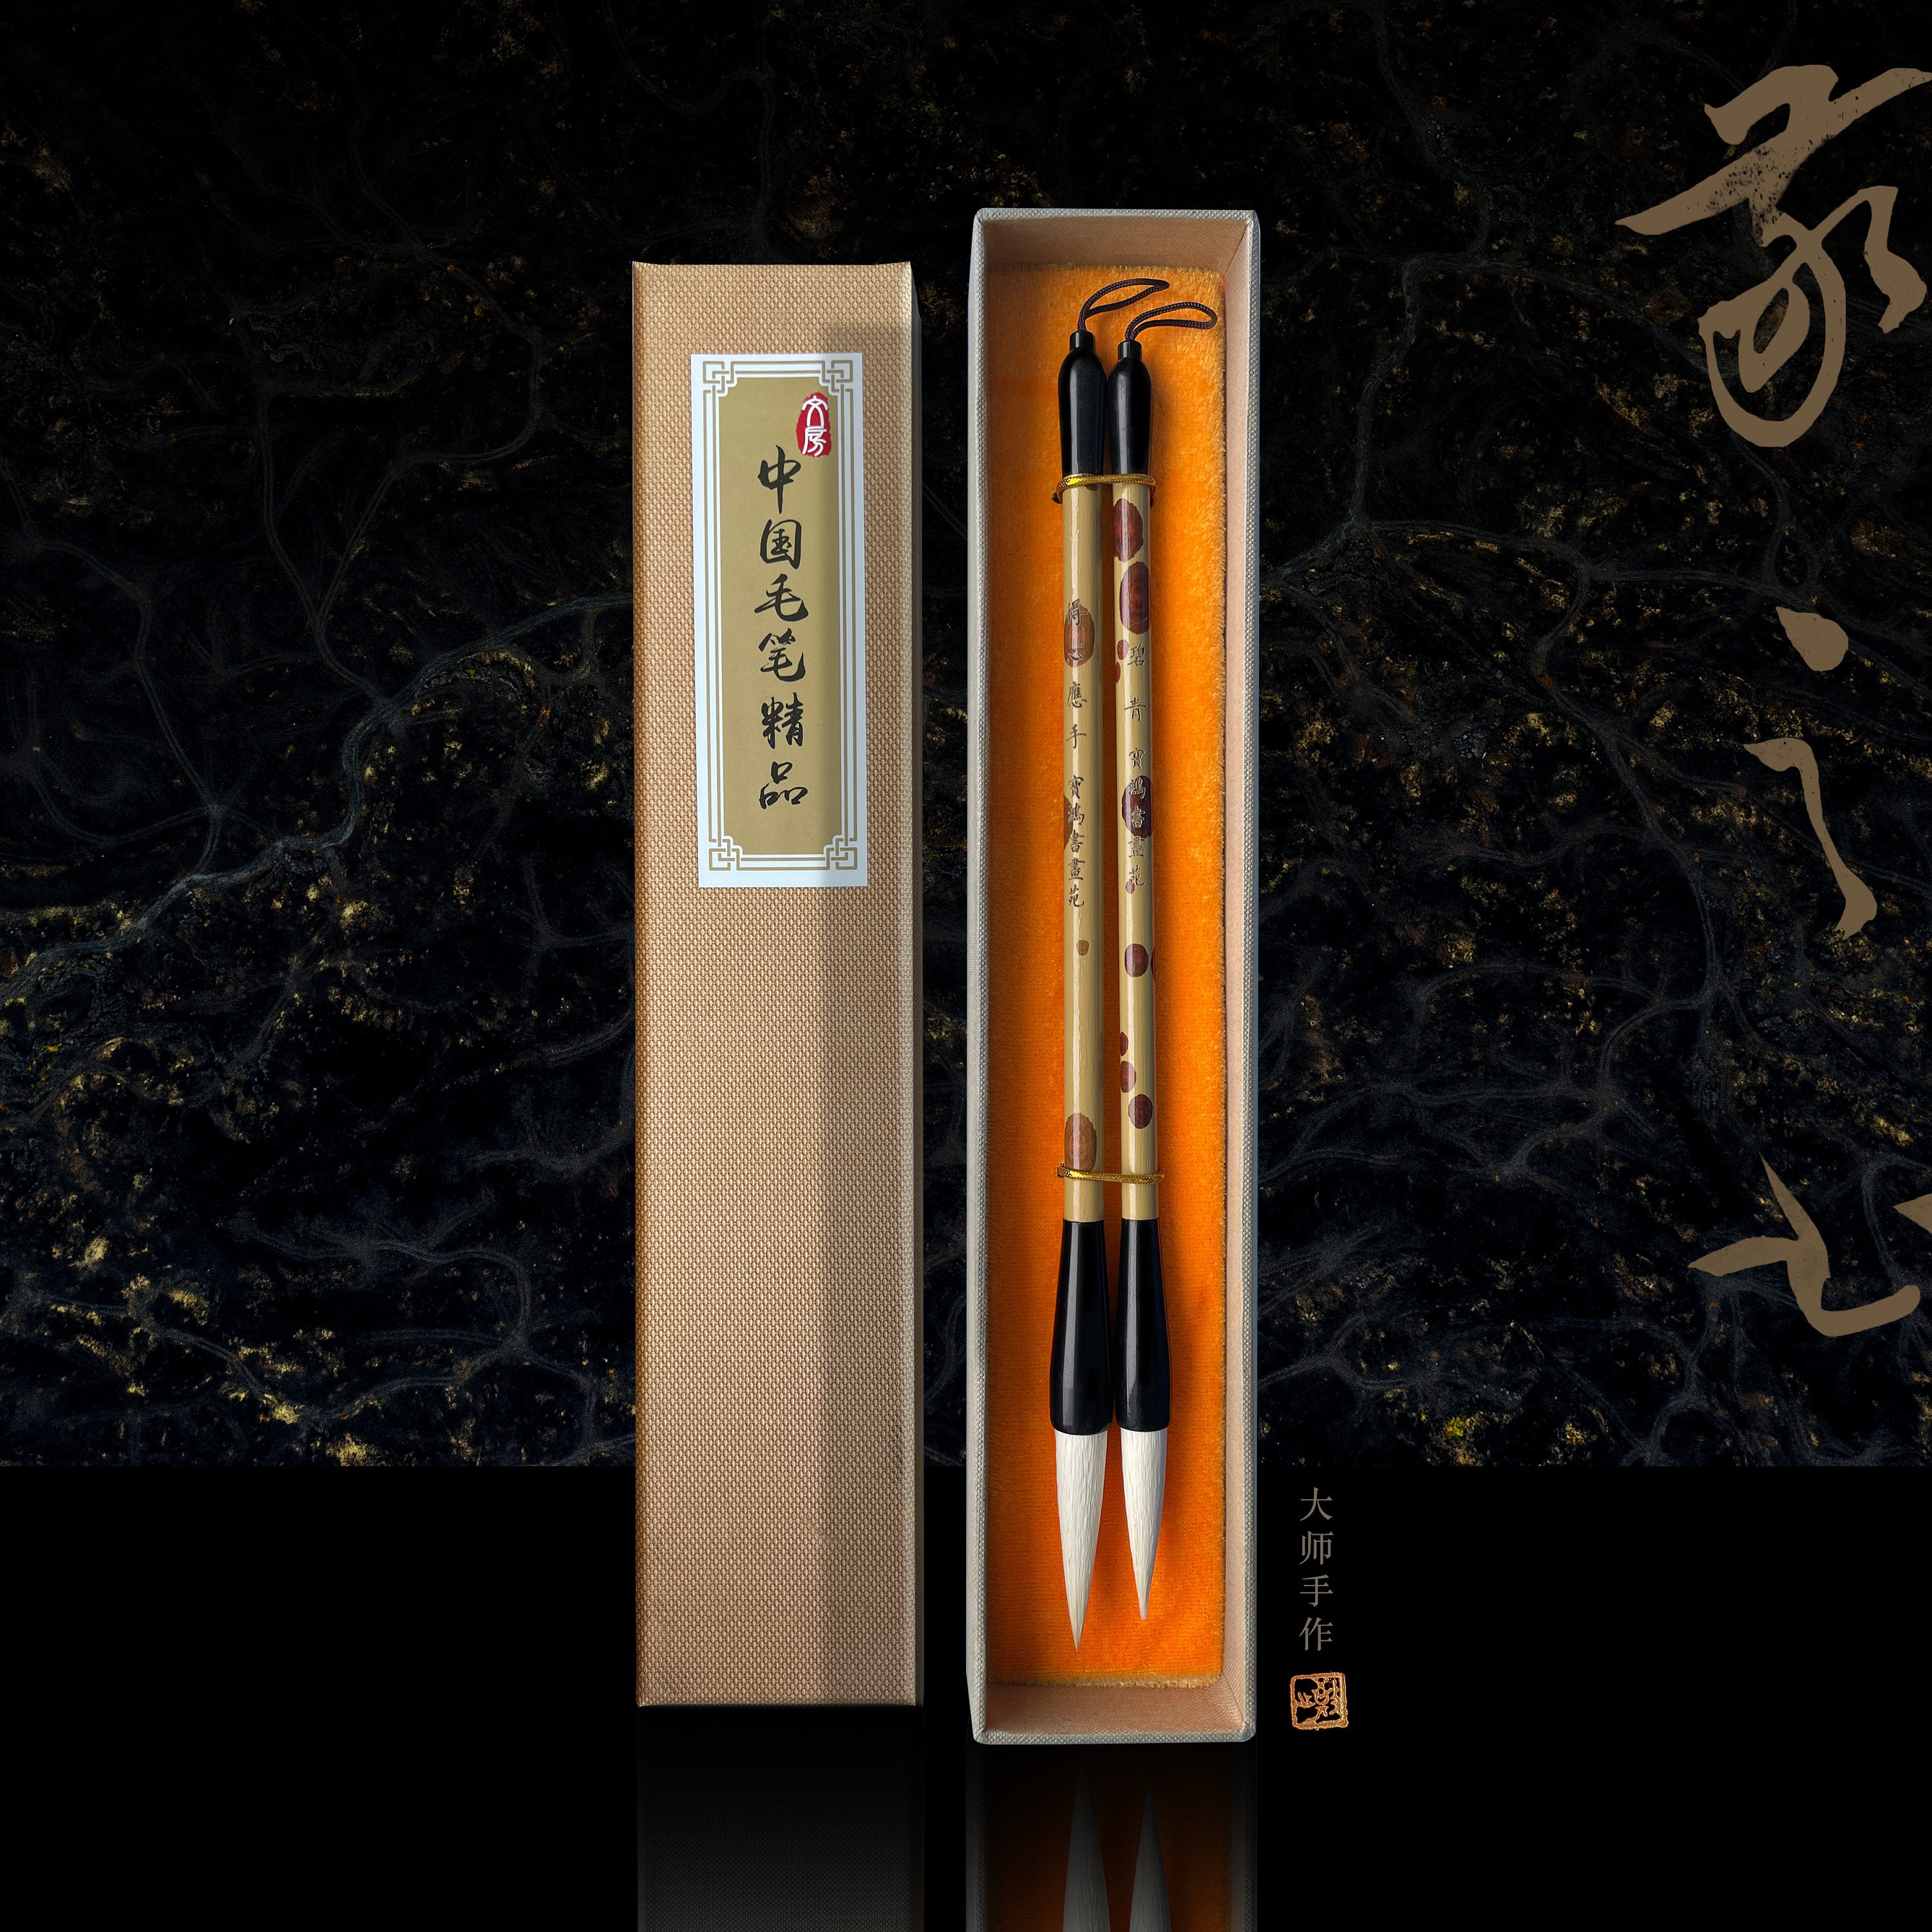 China Hand Lettering Calligraphy Marker for Artists Adults Kids